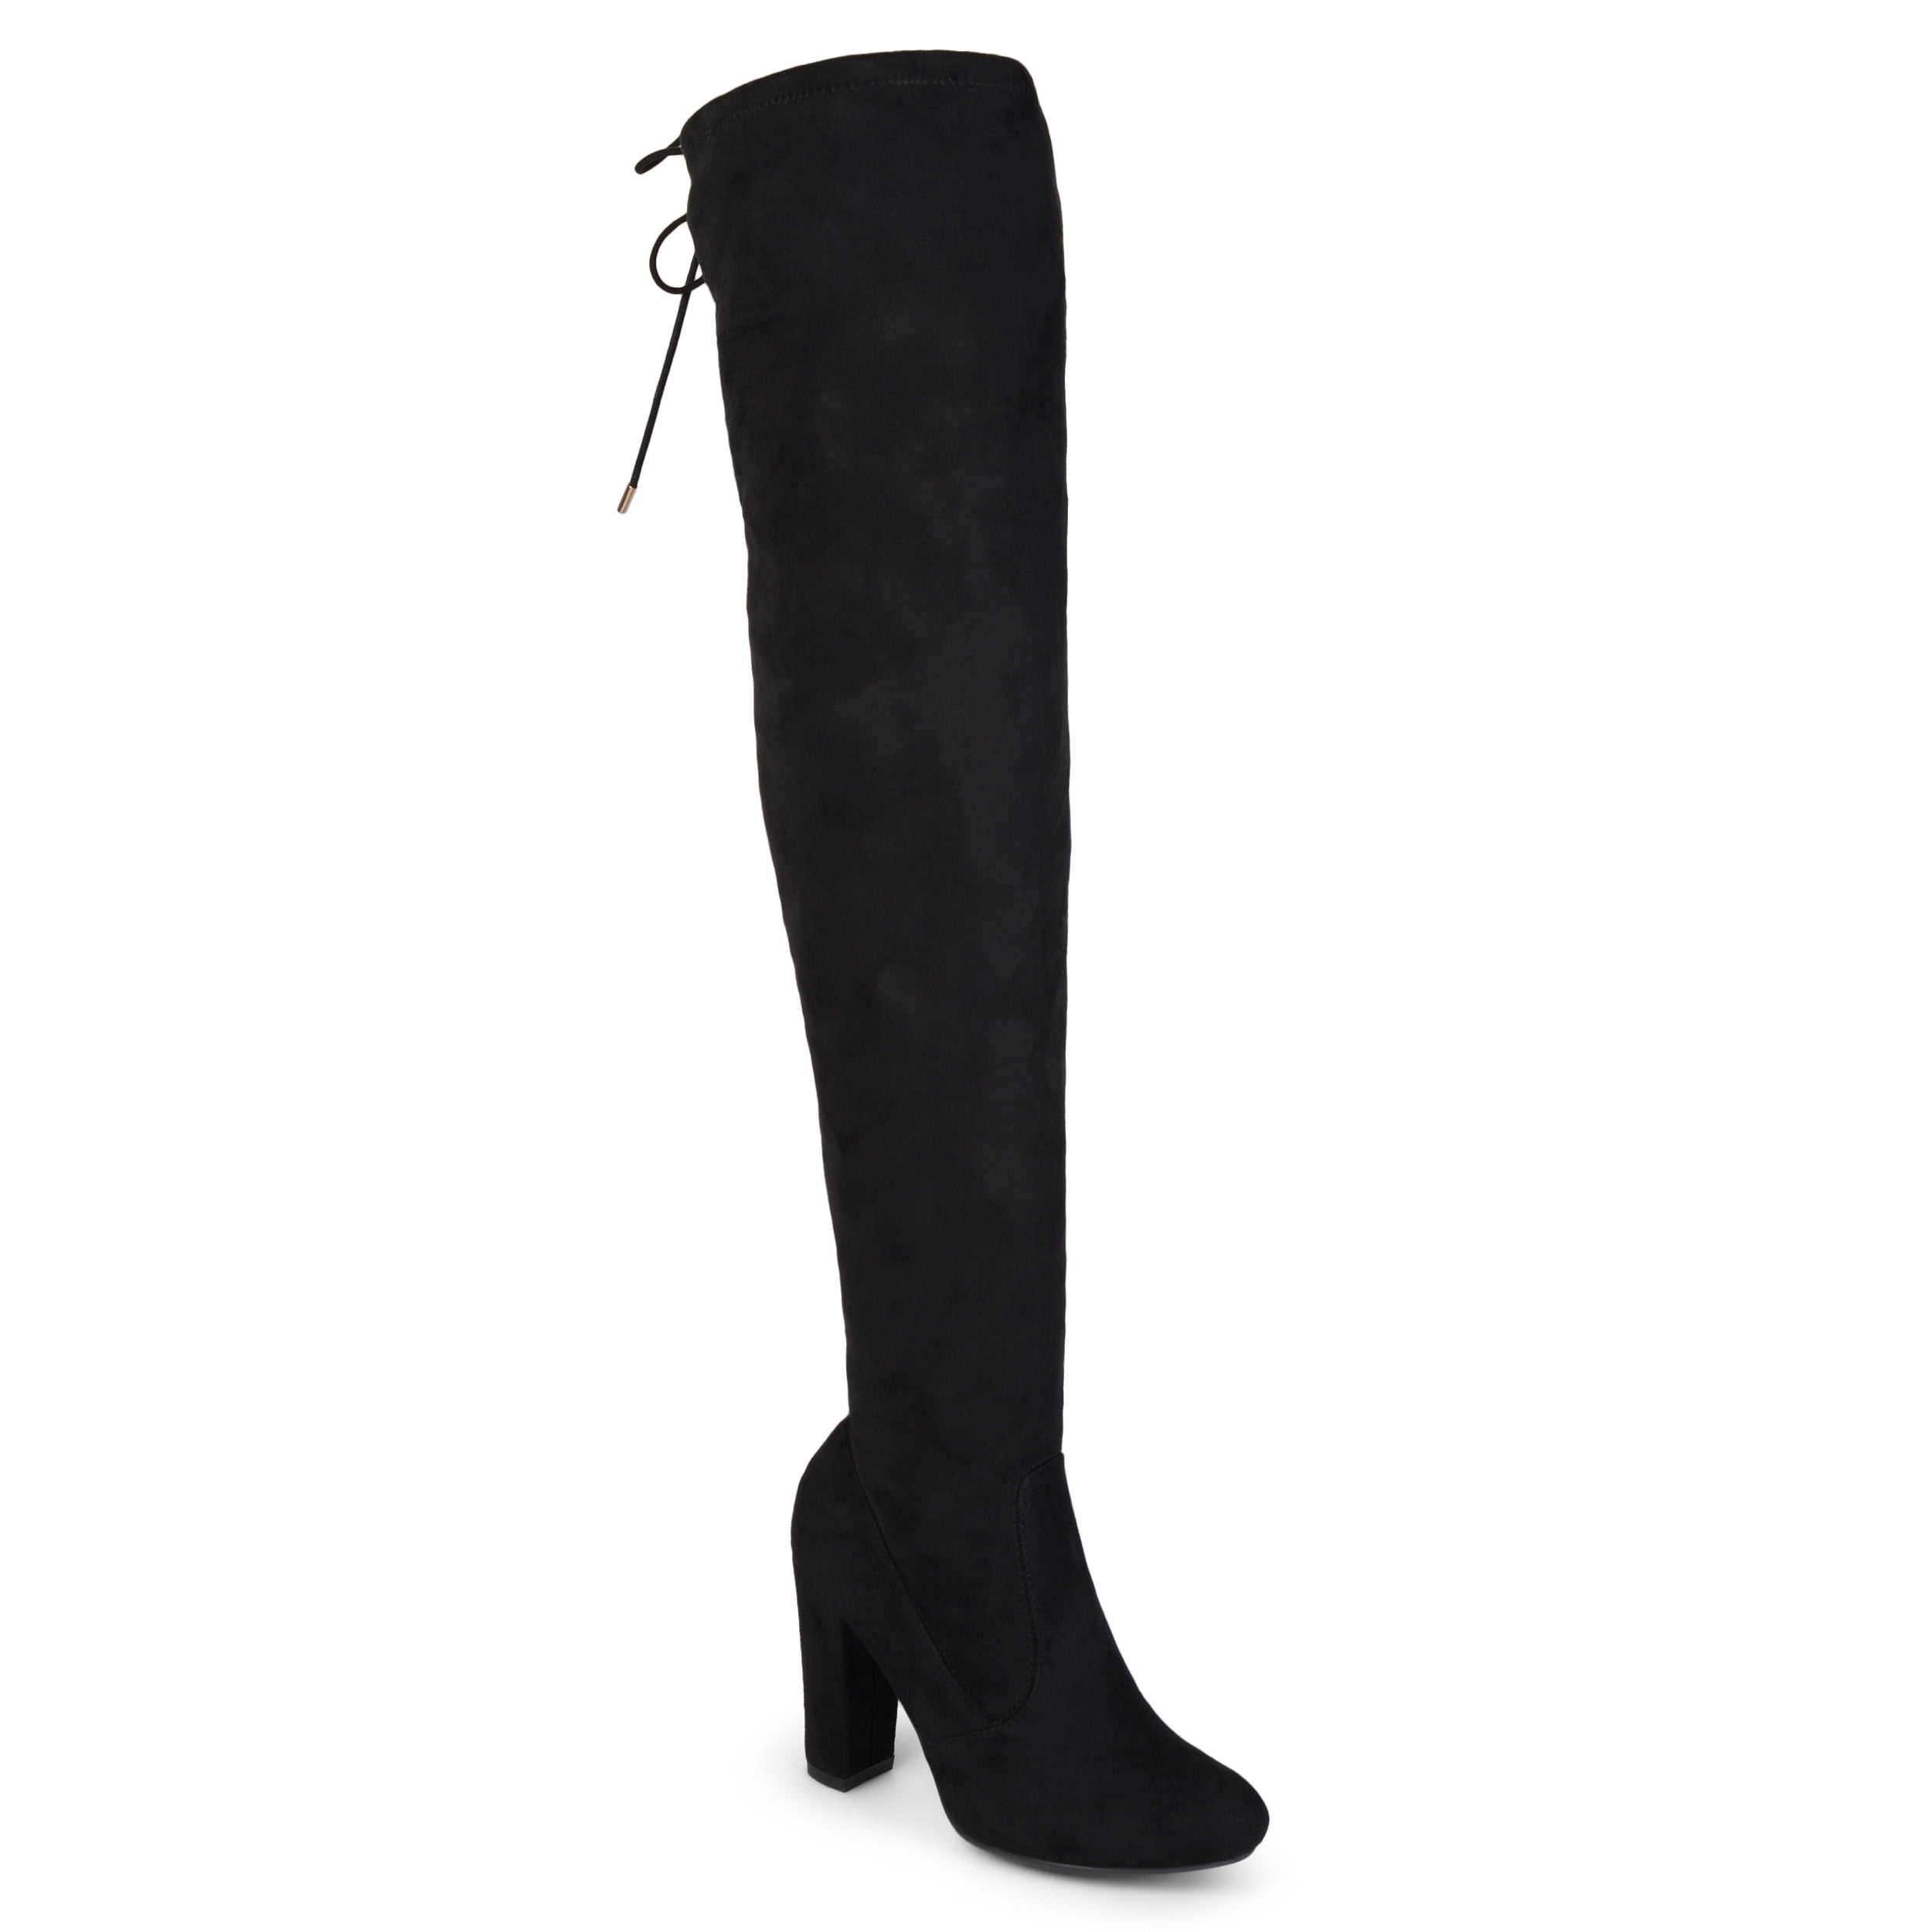 Details about   2 Colors Women's Western Cowboy Round Toe Block Heel Mid Calf Knee High Boots D 